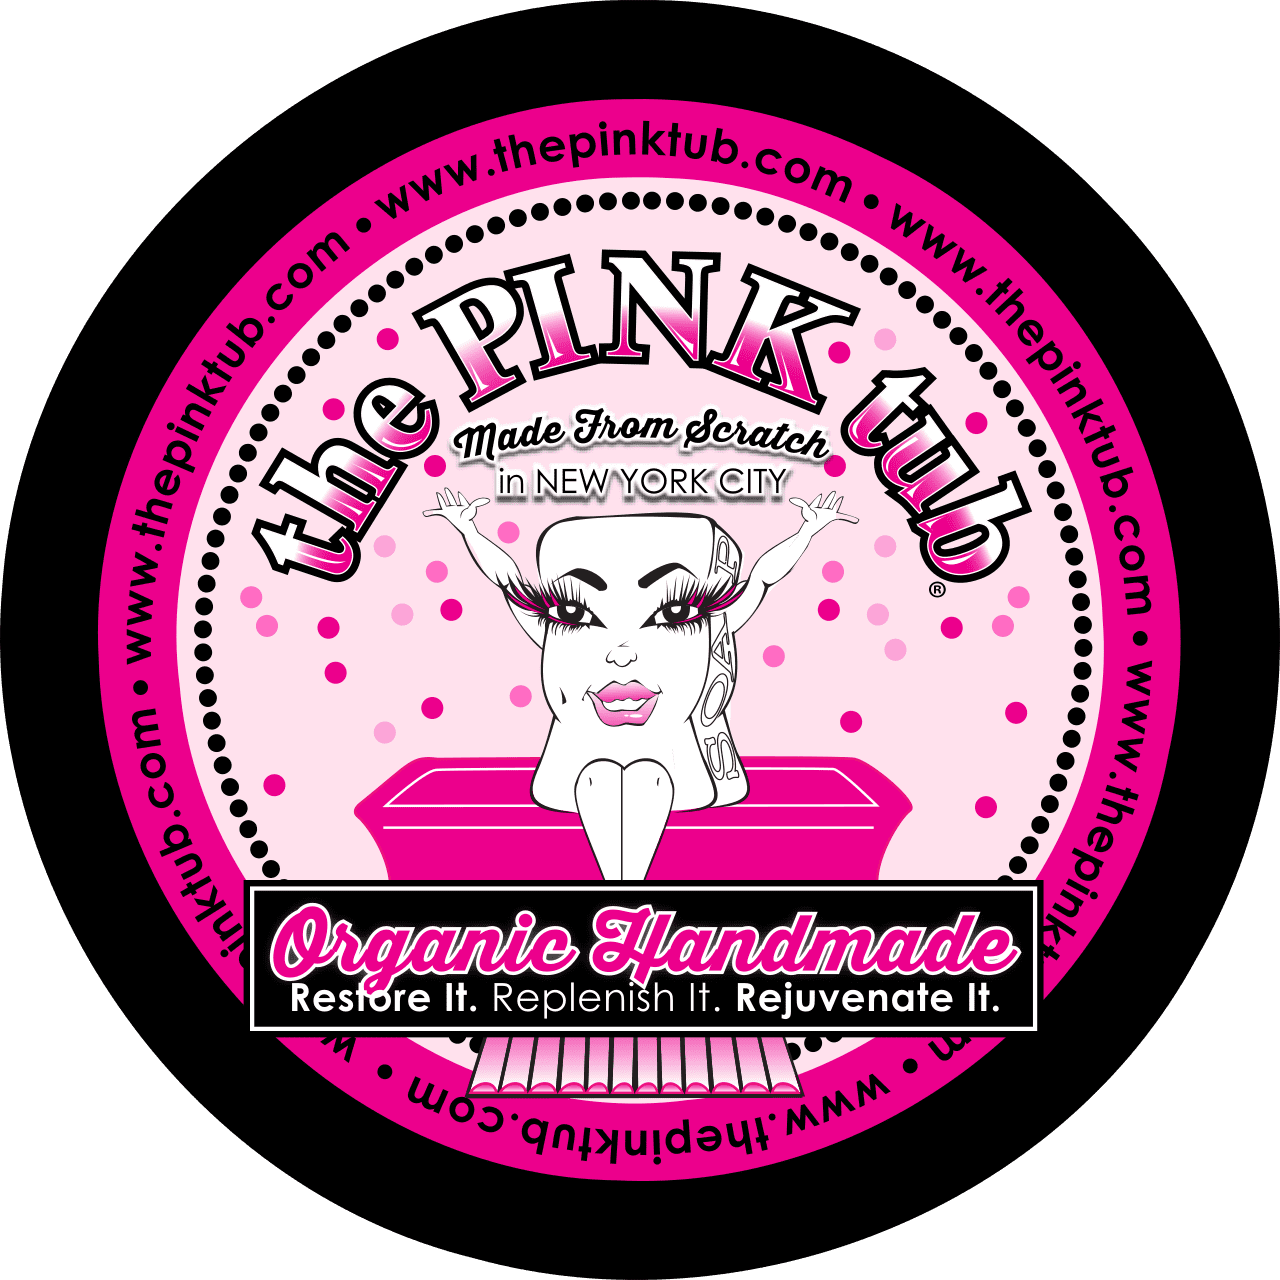 A pink pig logo with a woman in the background.